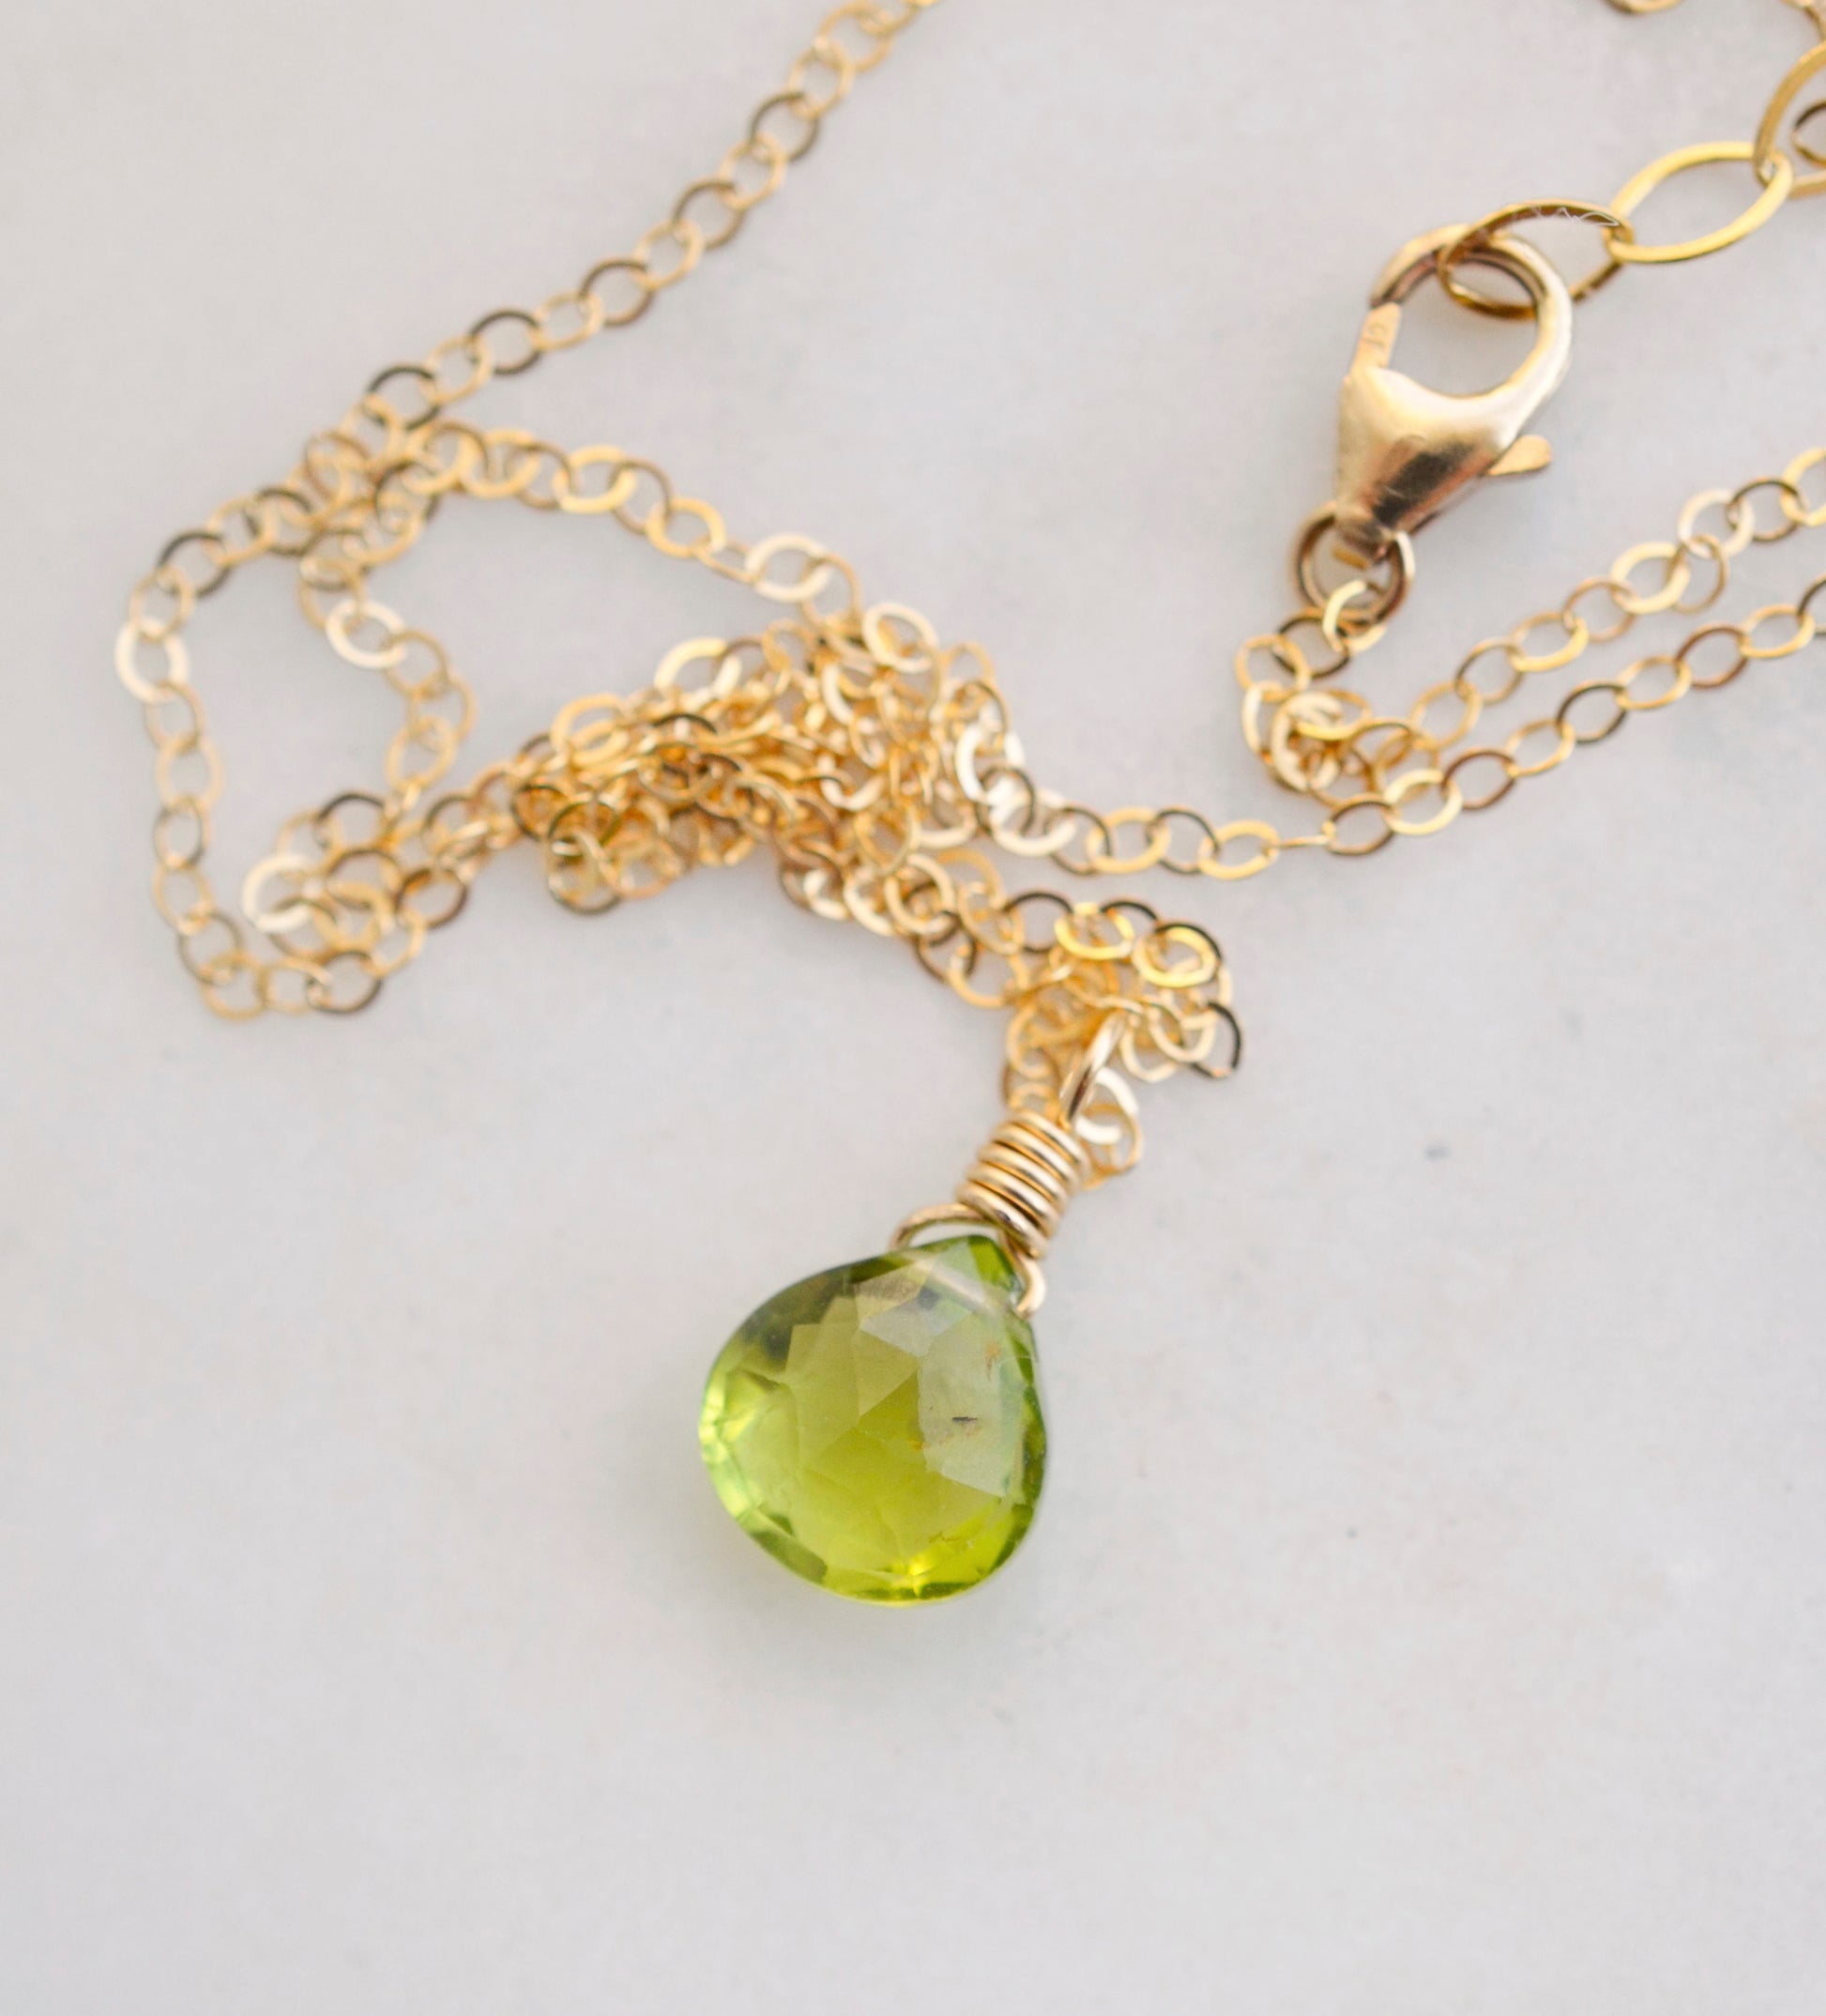 Natural green Peridot faceted teardrop suspended from a 14k gold filled cable chain.